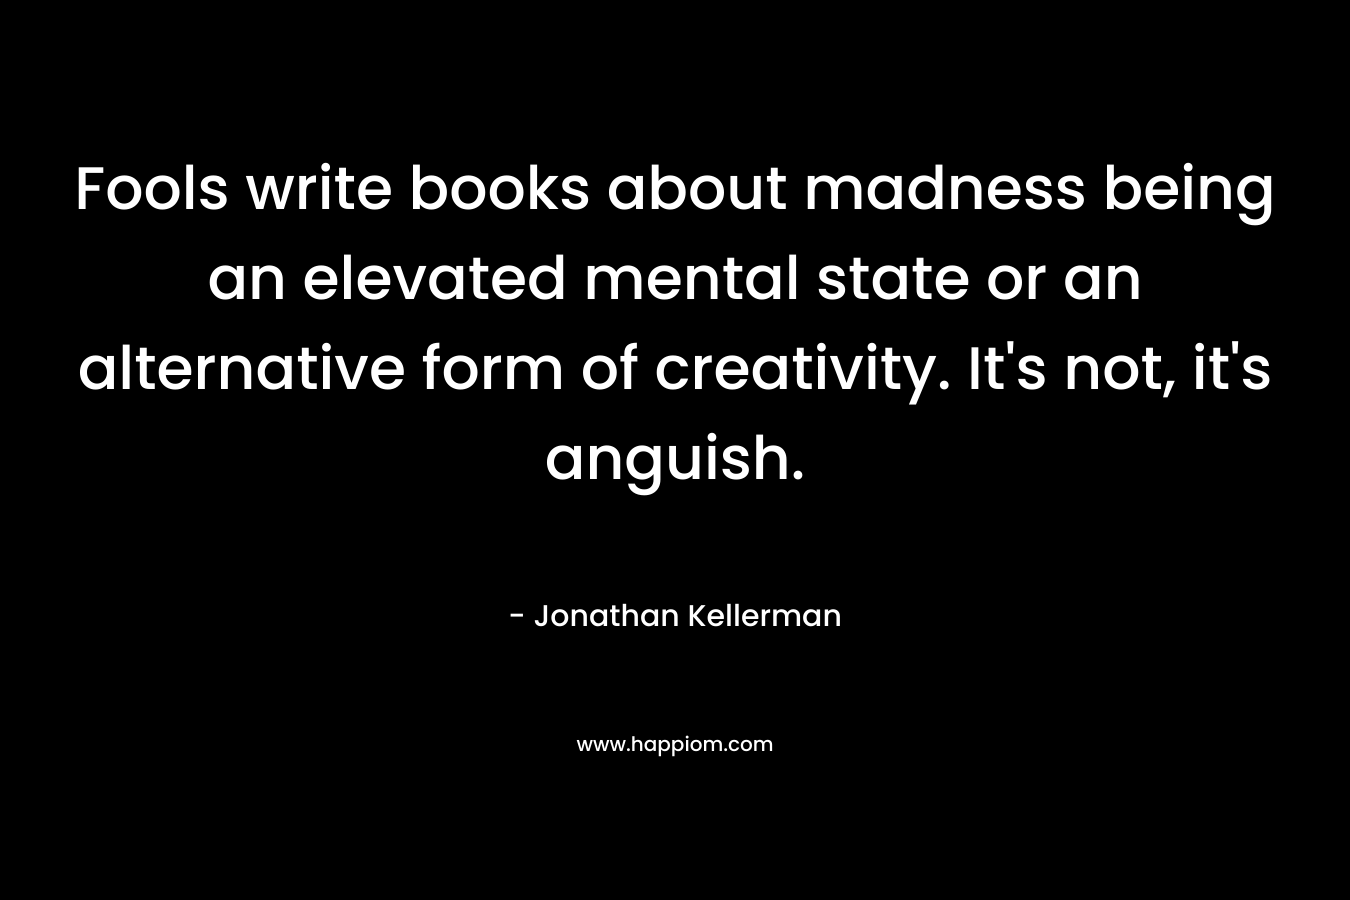 Fools write books about madness being an elevated mental state or an alternative form of creativity. It’s not, it’s anguish. – Jonathan Kellerman